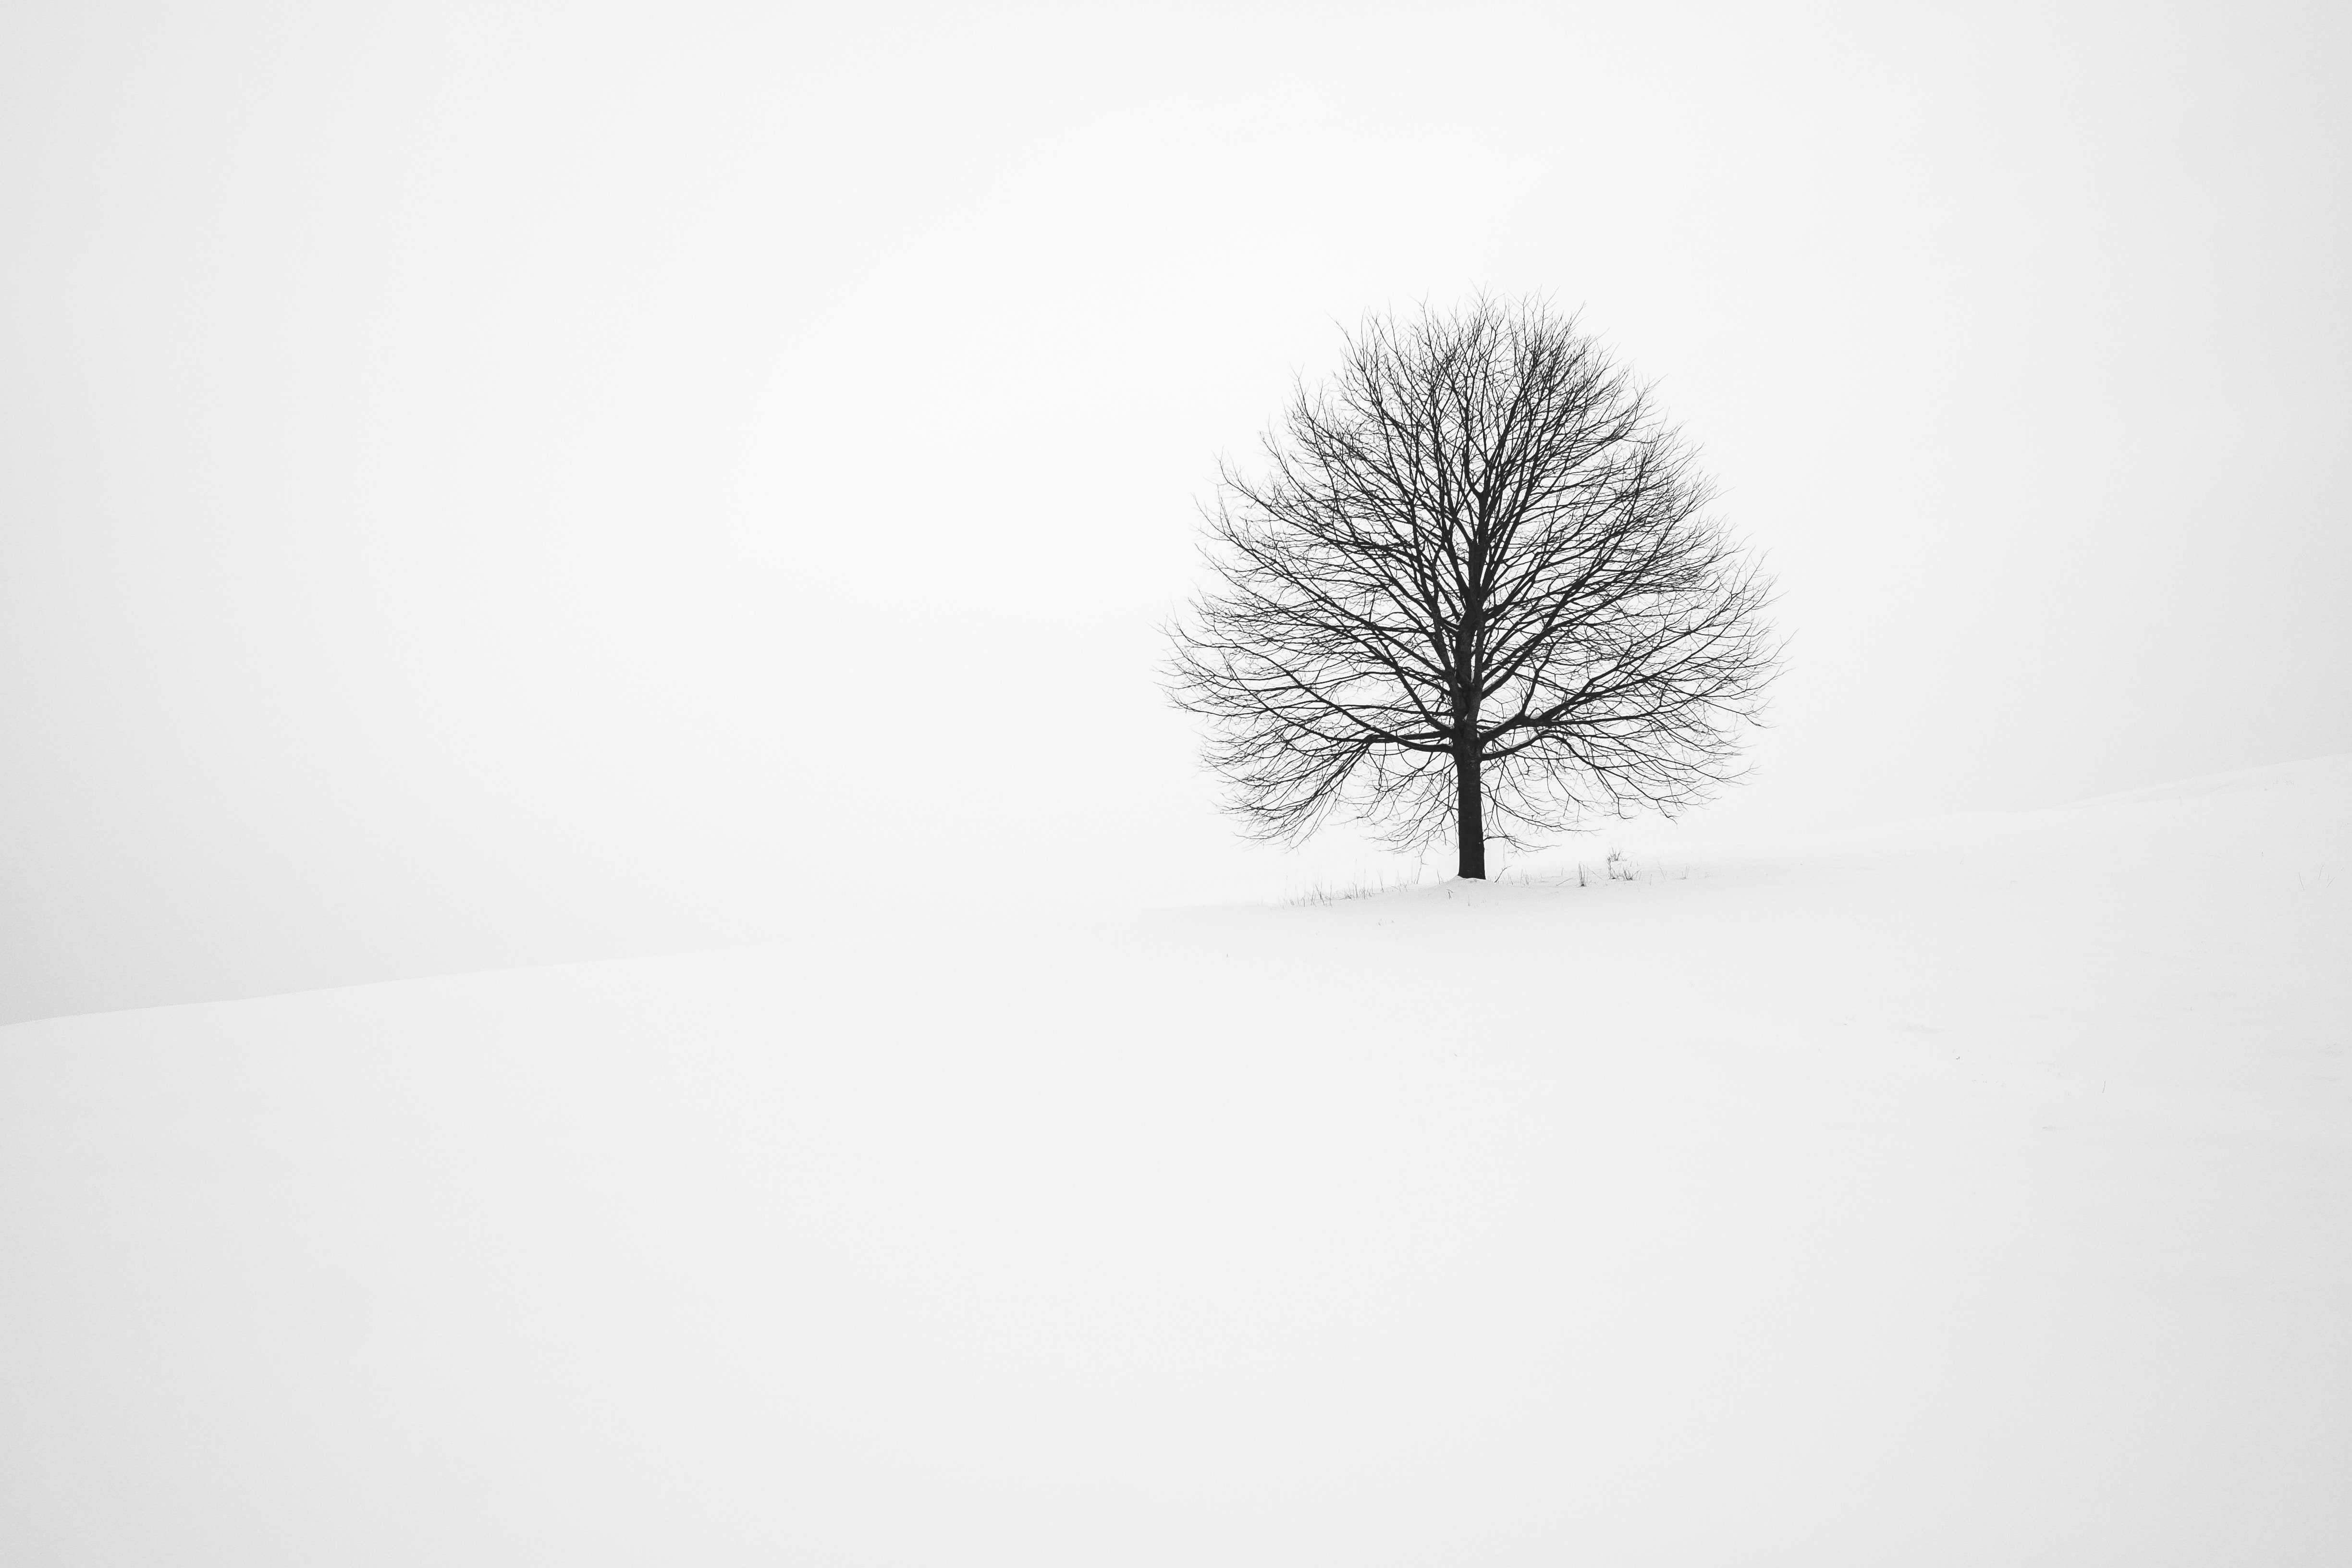 minimalism, winter, snow, wood, tree, bw, chb wallpaper for mobile